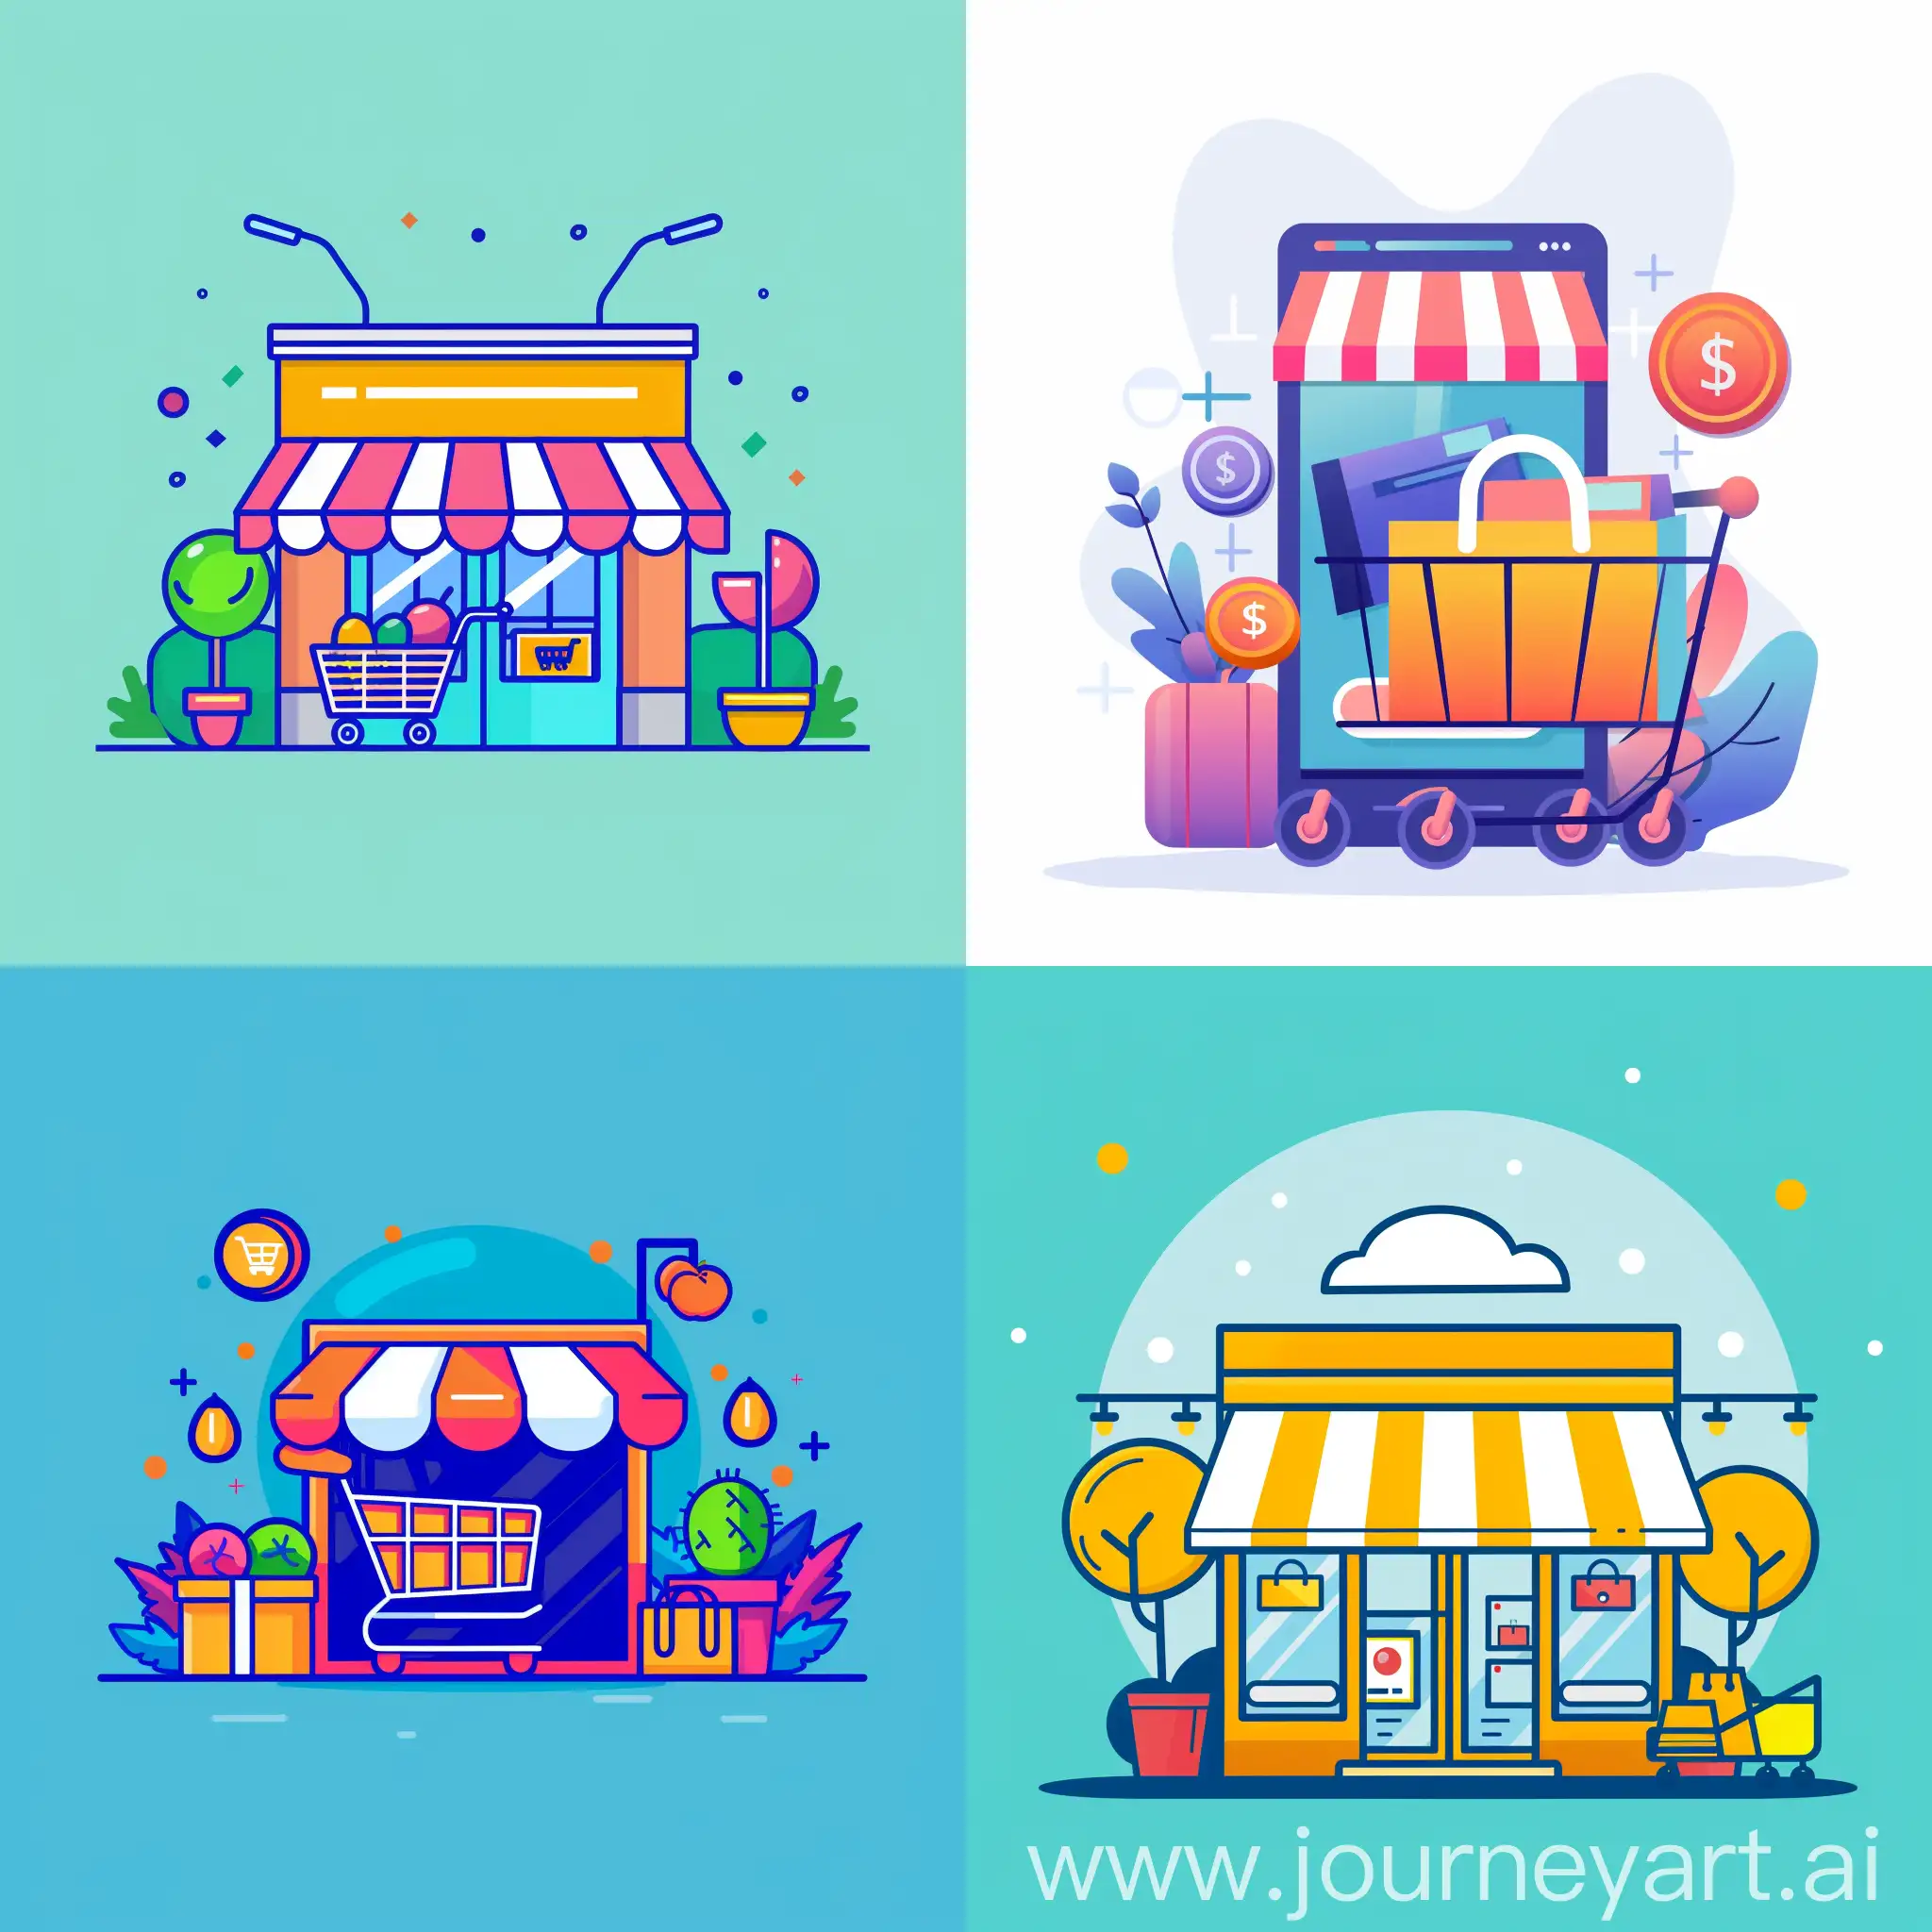 illustration a minimal graphic image about "How to build ecommerce website in Baluchistan area in Iran" with a plain color background